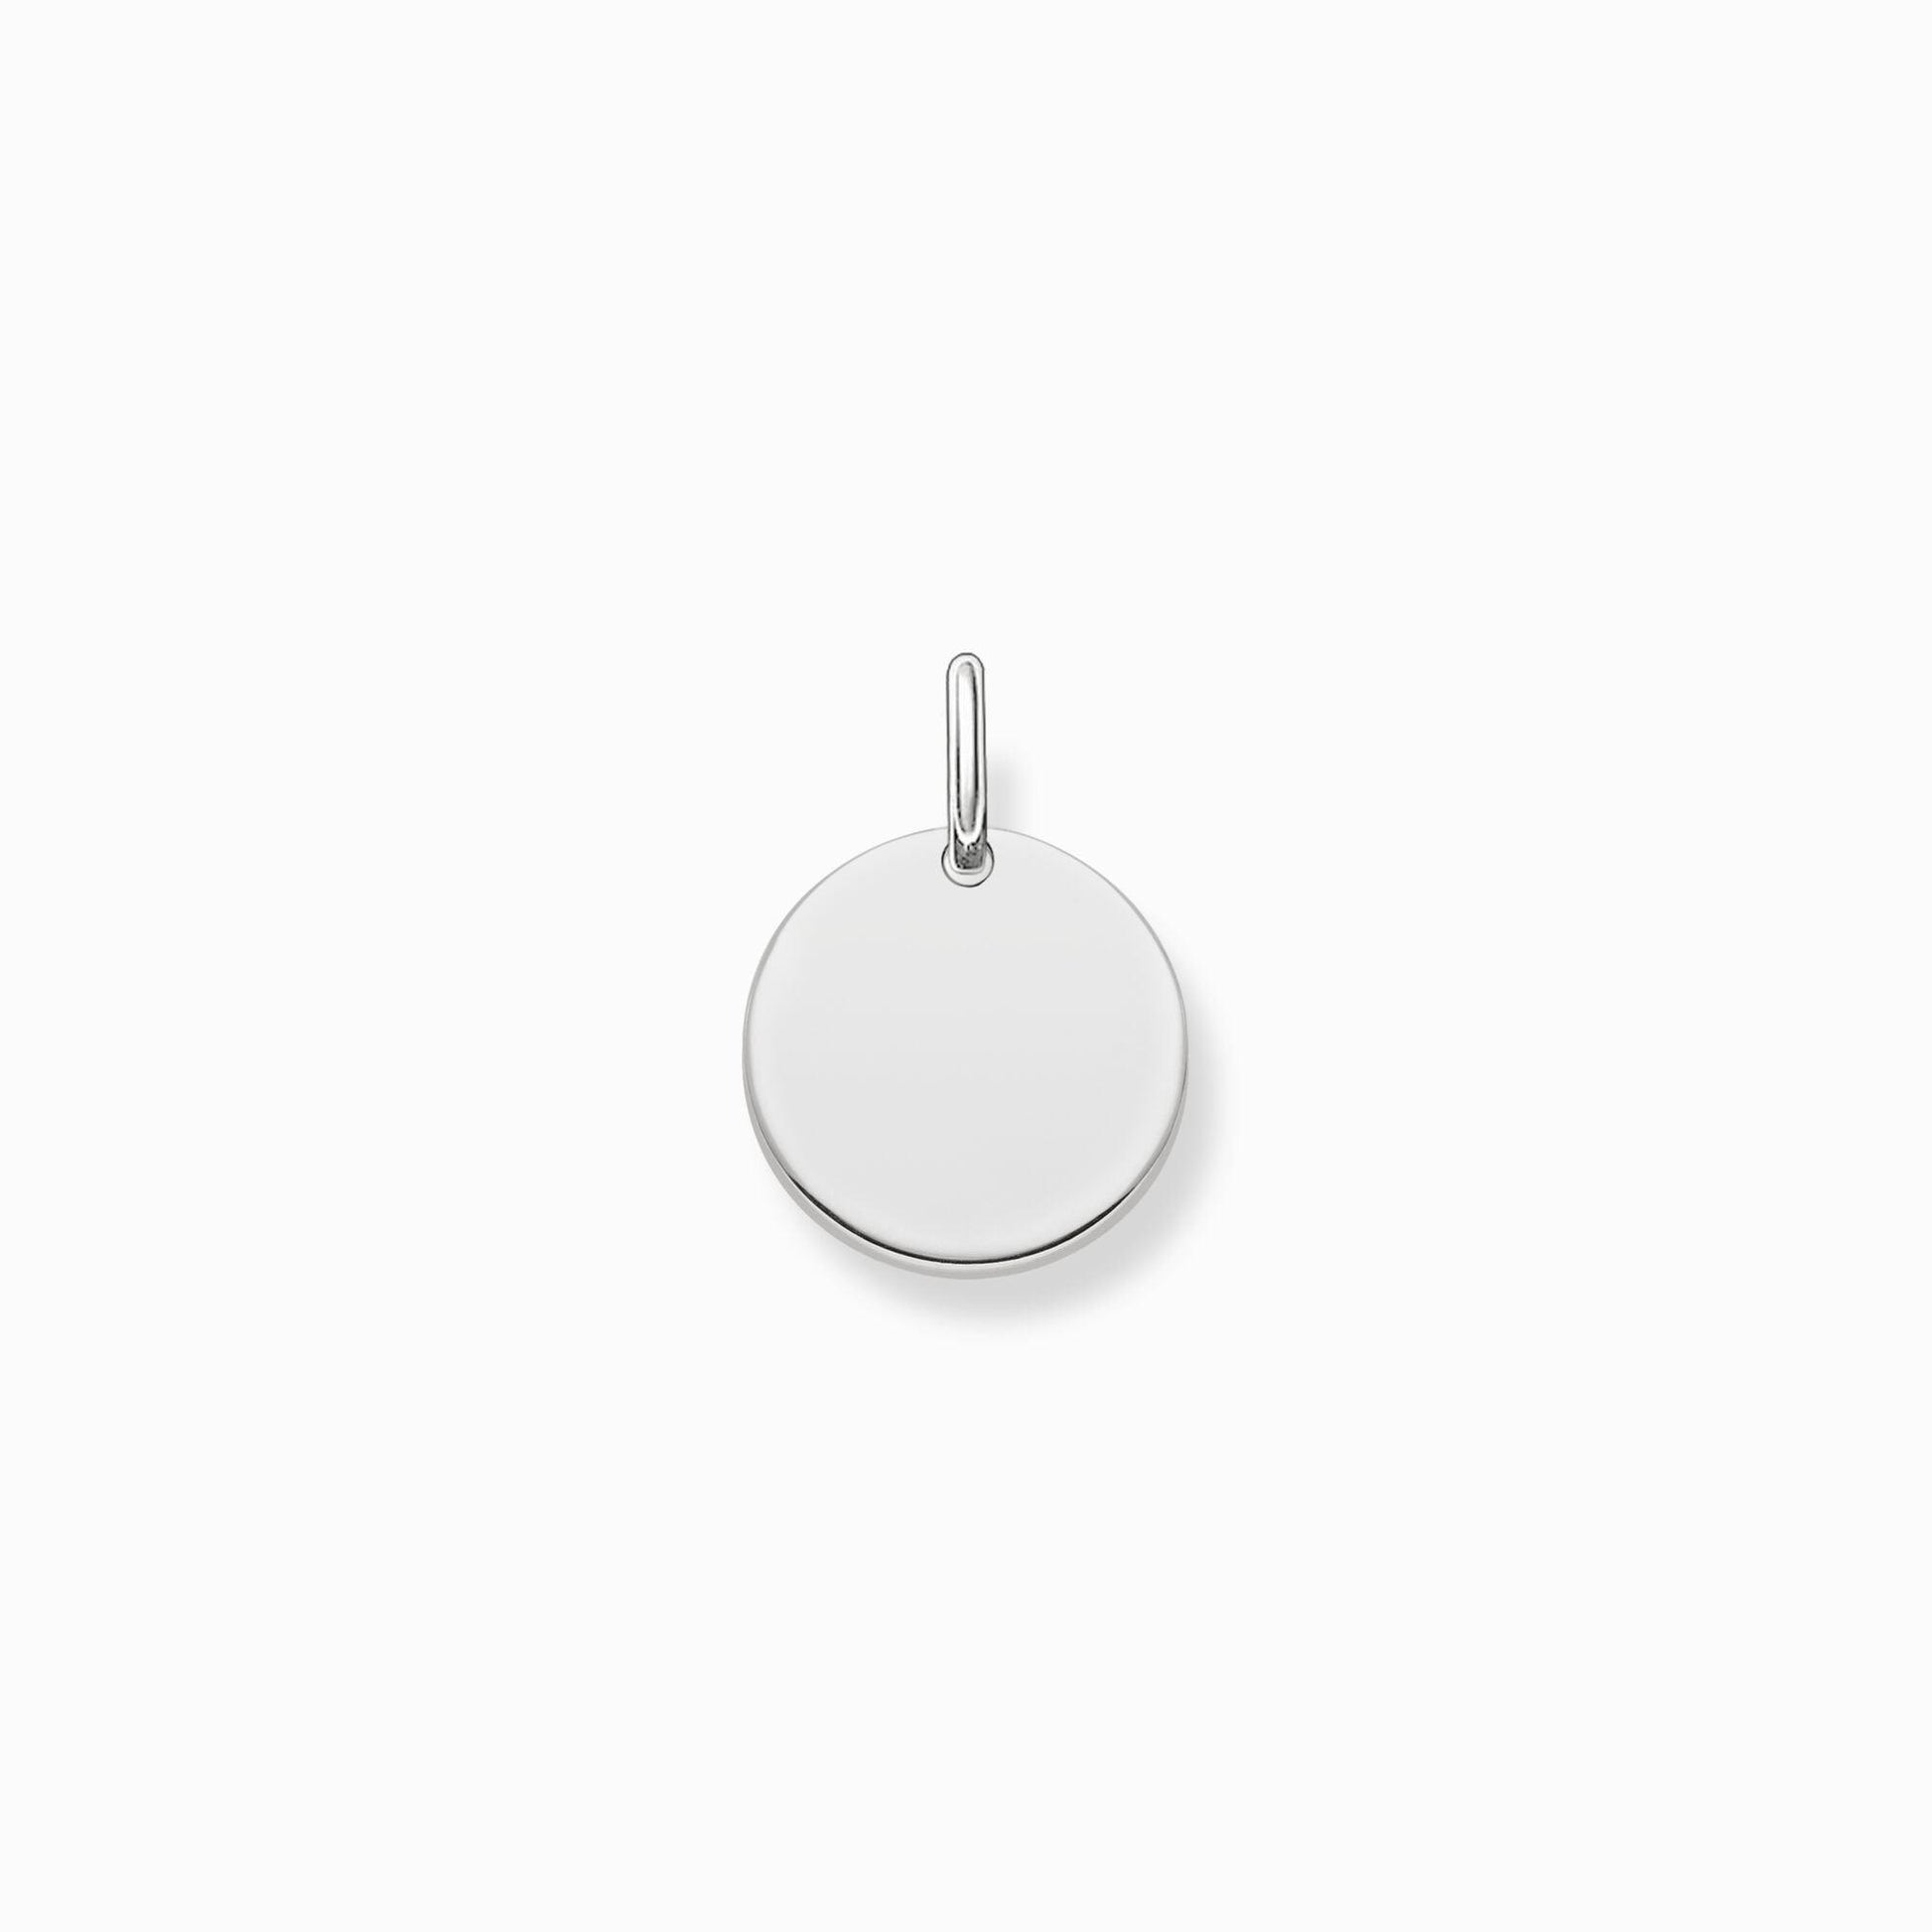 Thomas Sabo Sterling Silver Small Disc Pendant LBPE0001 - Judith Hart Jewellers